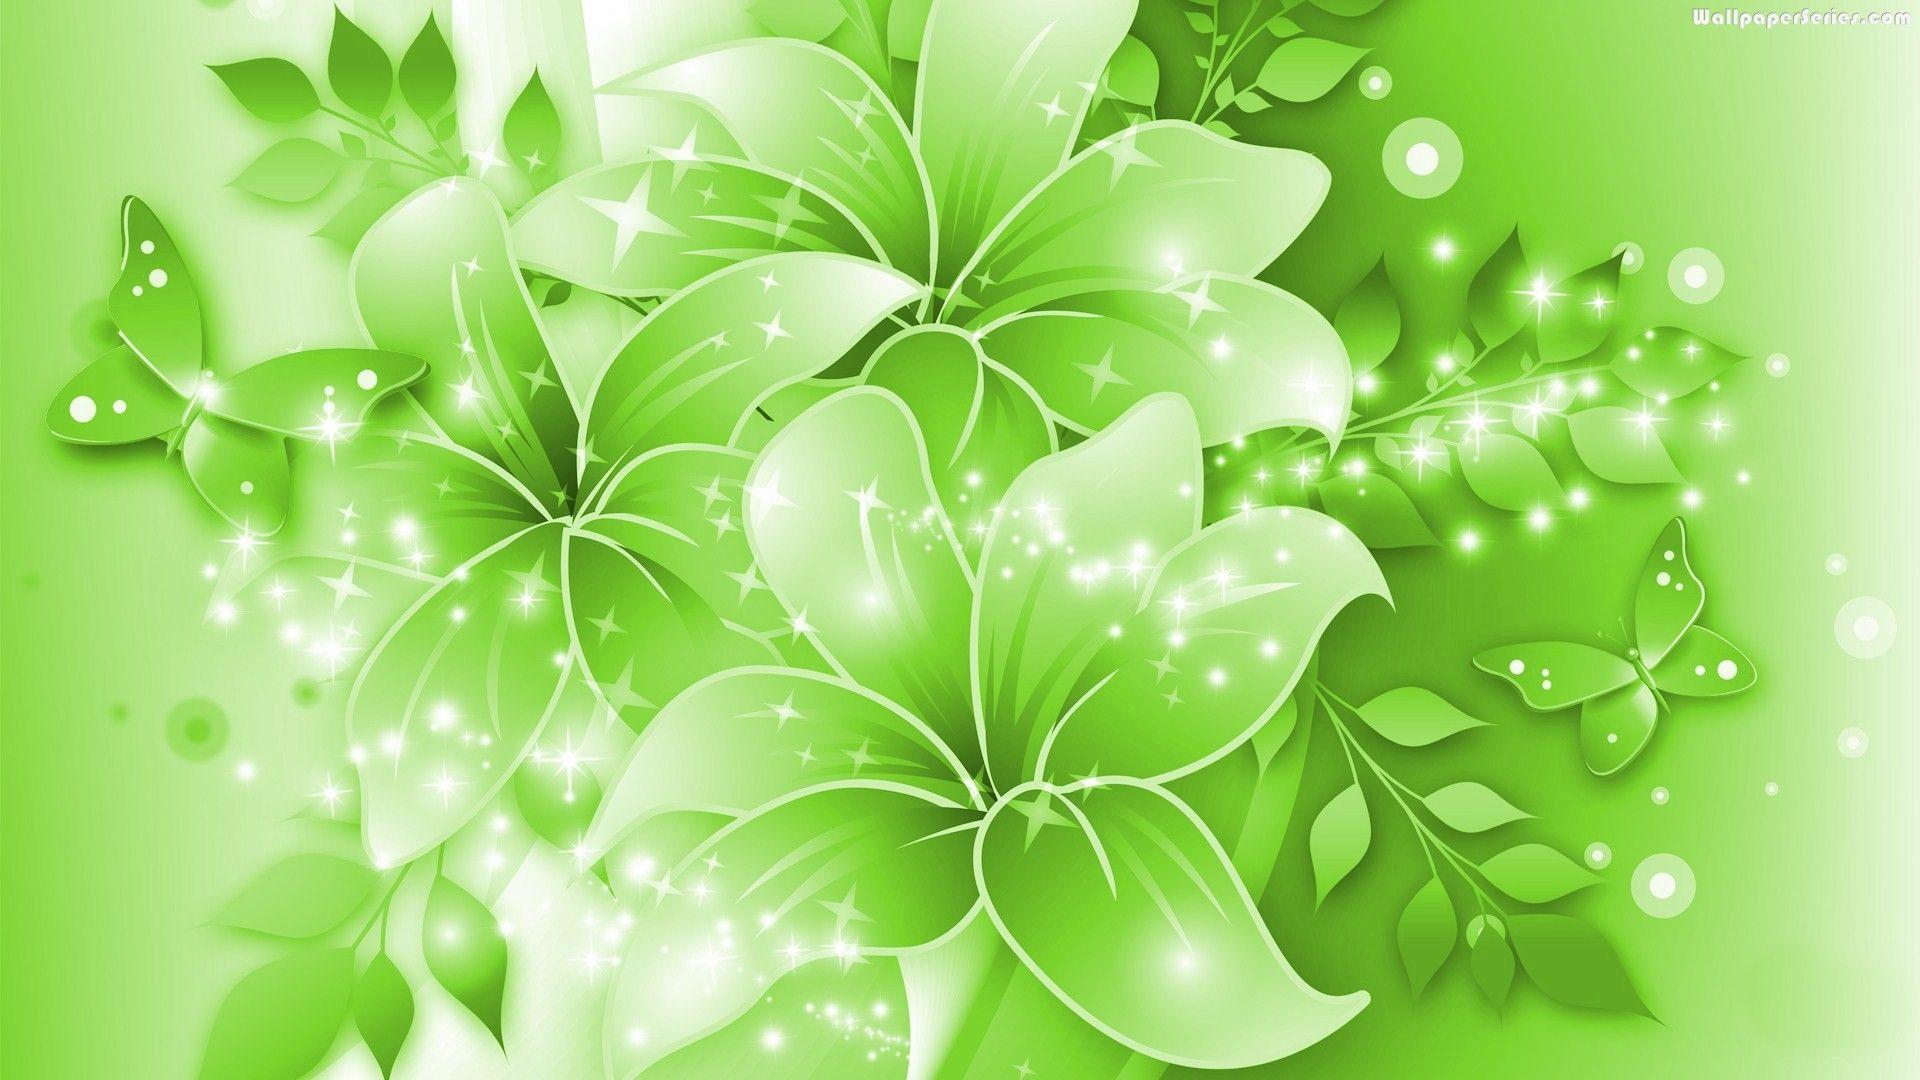 3y45: Green Flowers Wallpaper HD Picture One HD Wallpaper Picture